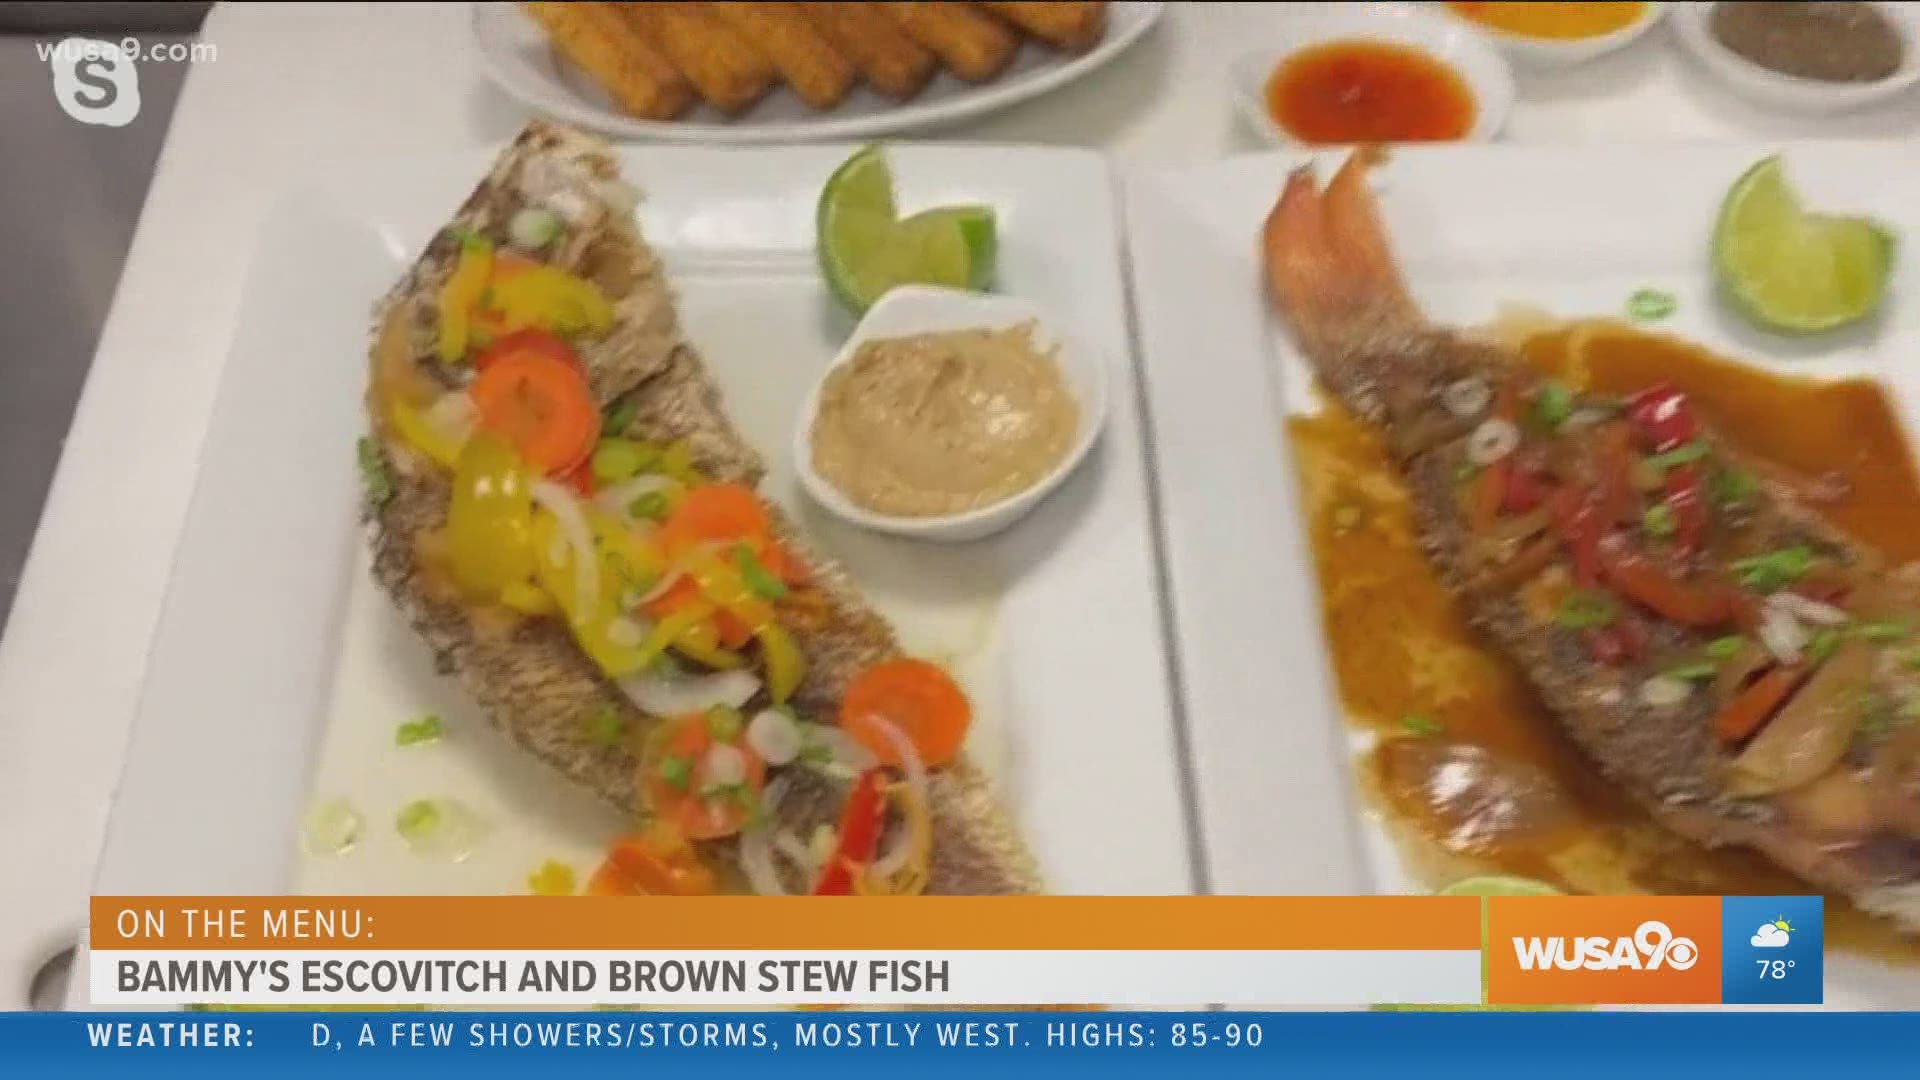 Escovitch fish and brown stew fish at Bammy's at the Navy Yard. Owner/Chefs Chris Morgan & Gerald Addison share their recipe.